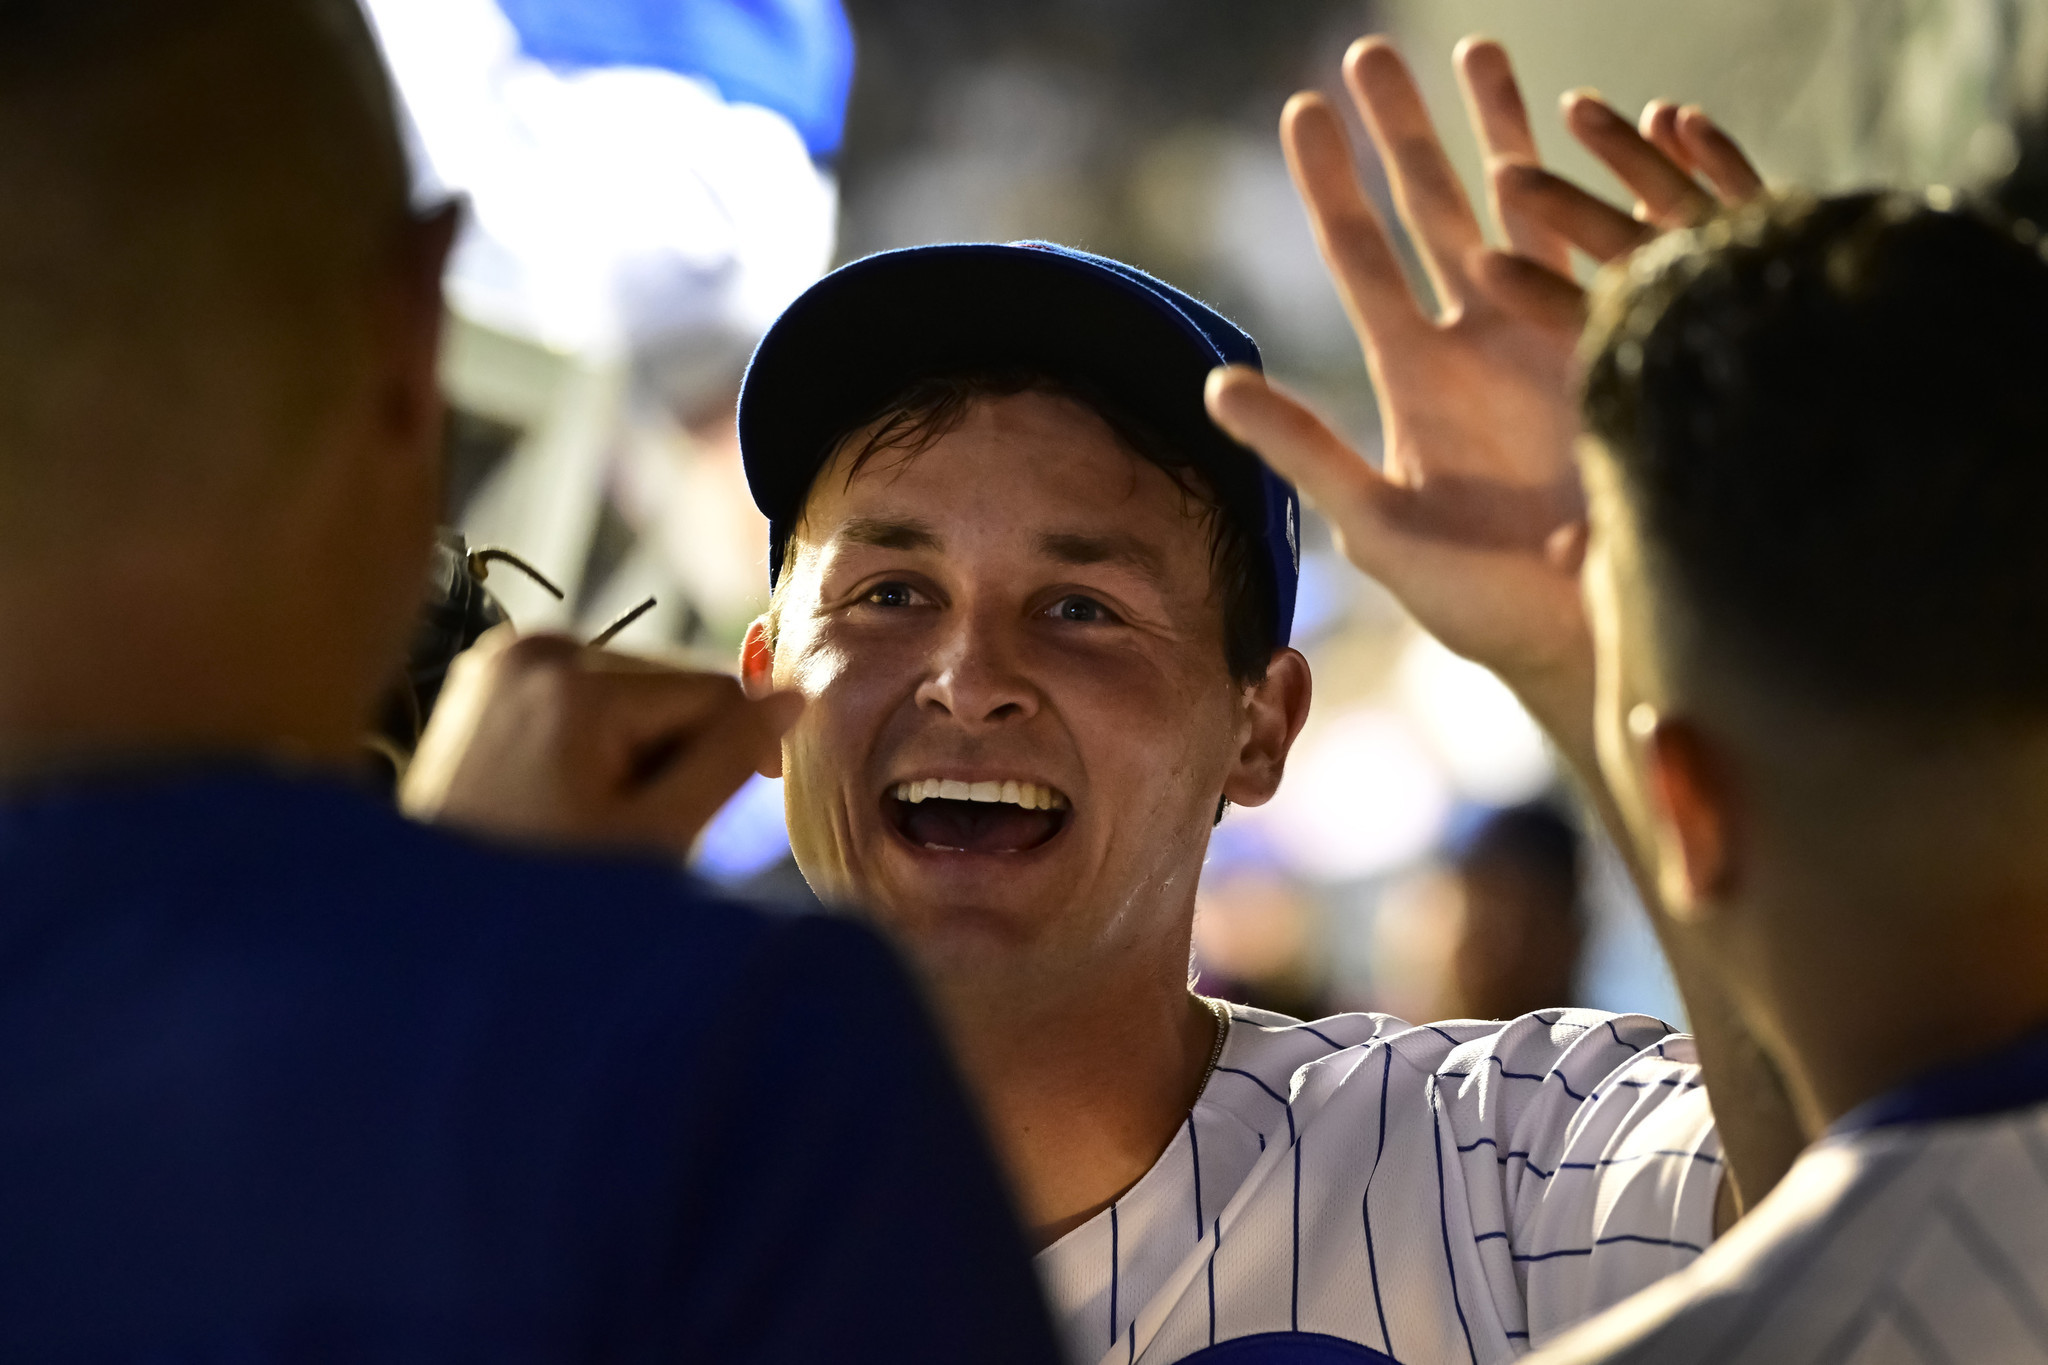 The 'Rookie of the Year' kid is going to the Cubs game. And he's